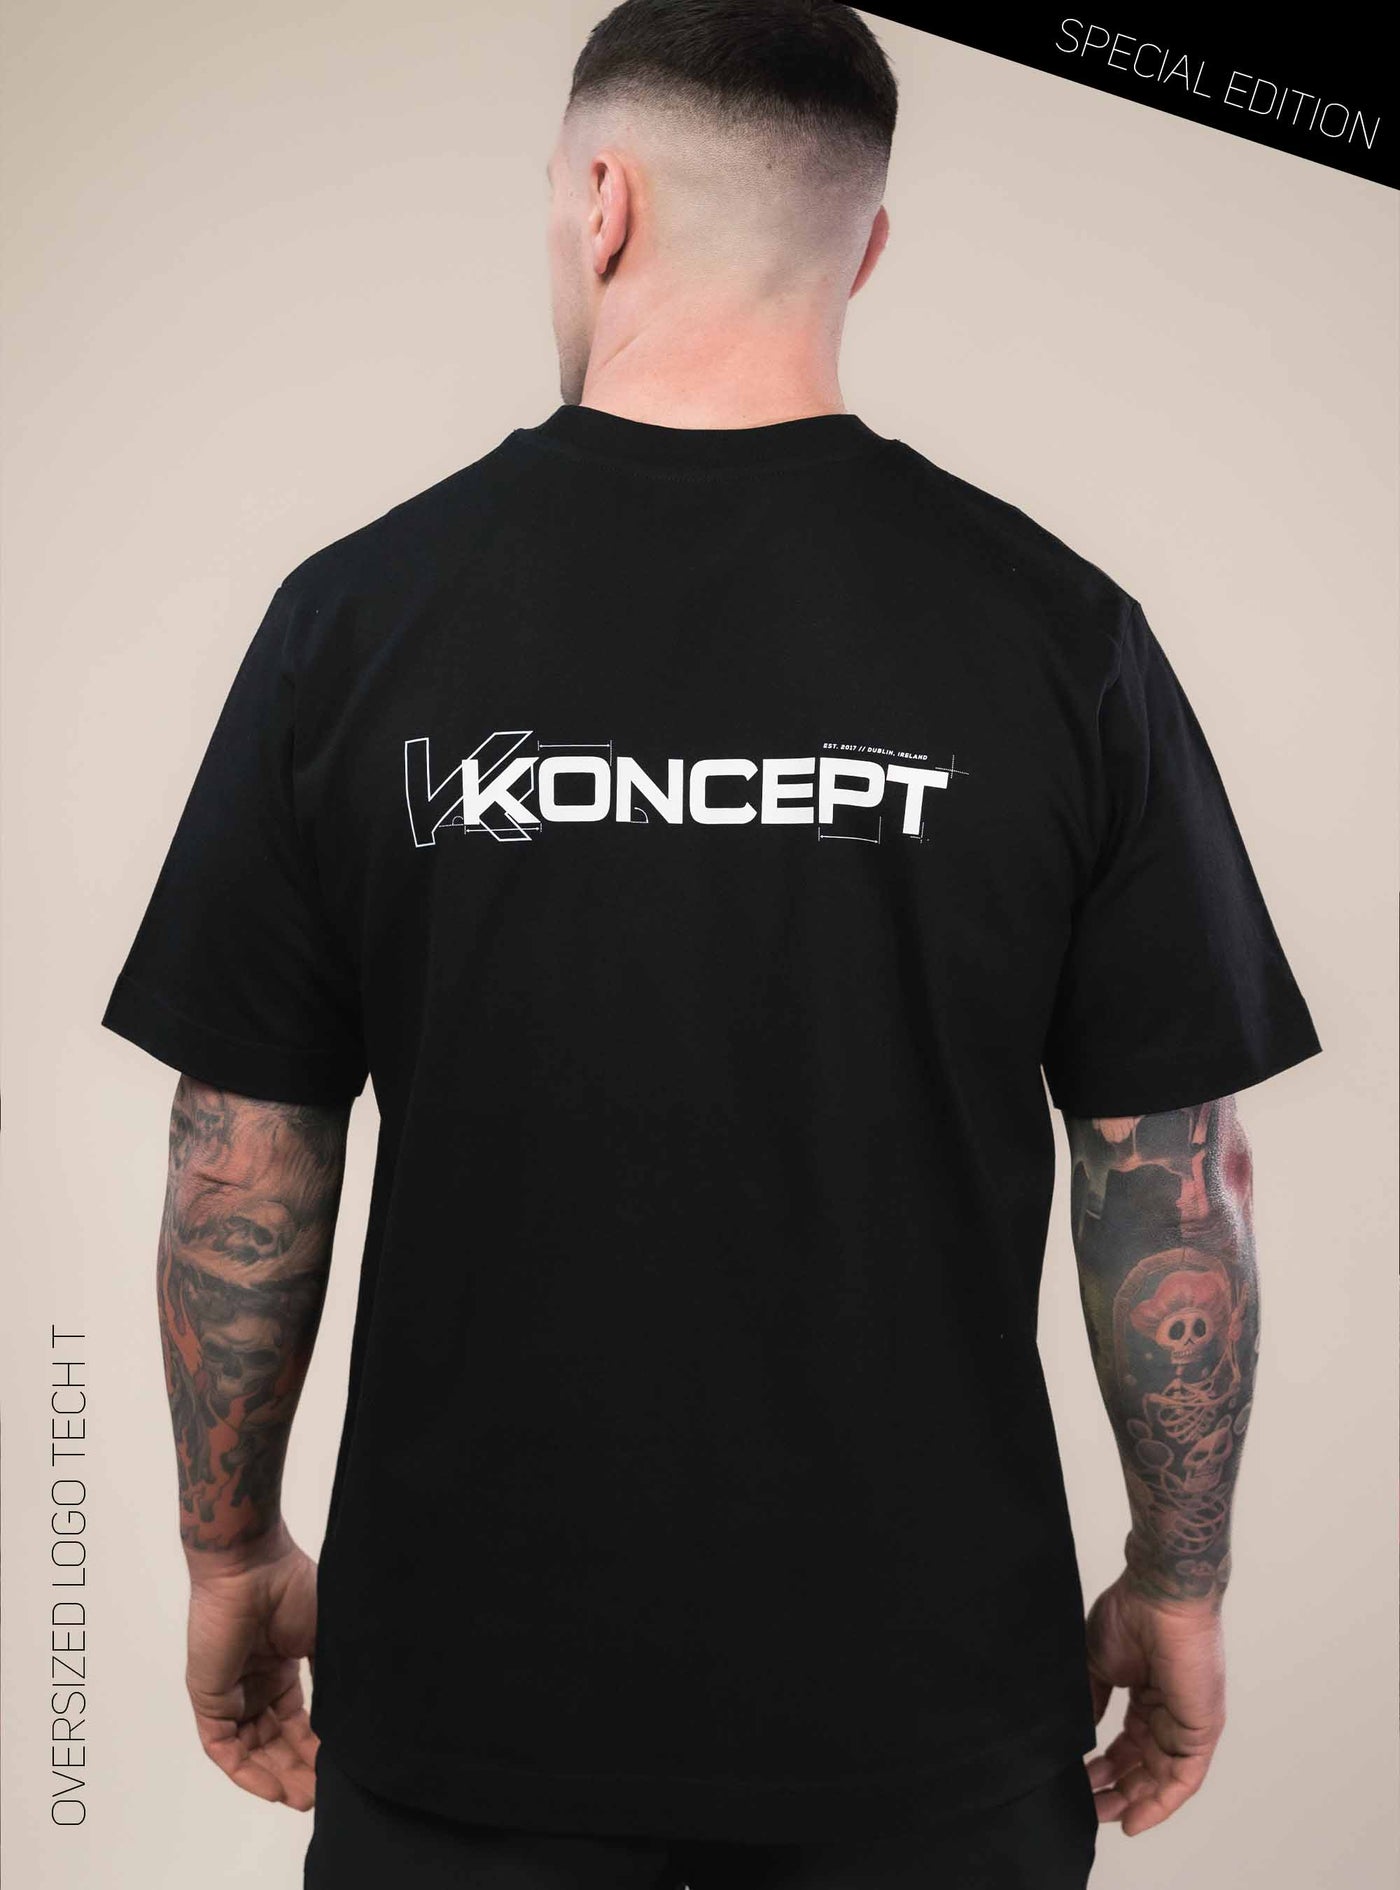 Koncept Fitwear | Fitness, Gym Clothing Brand | What is your Konce...